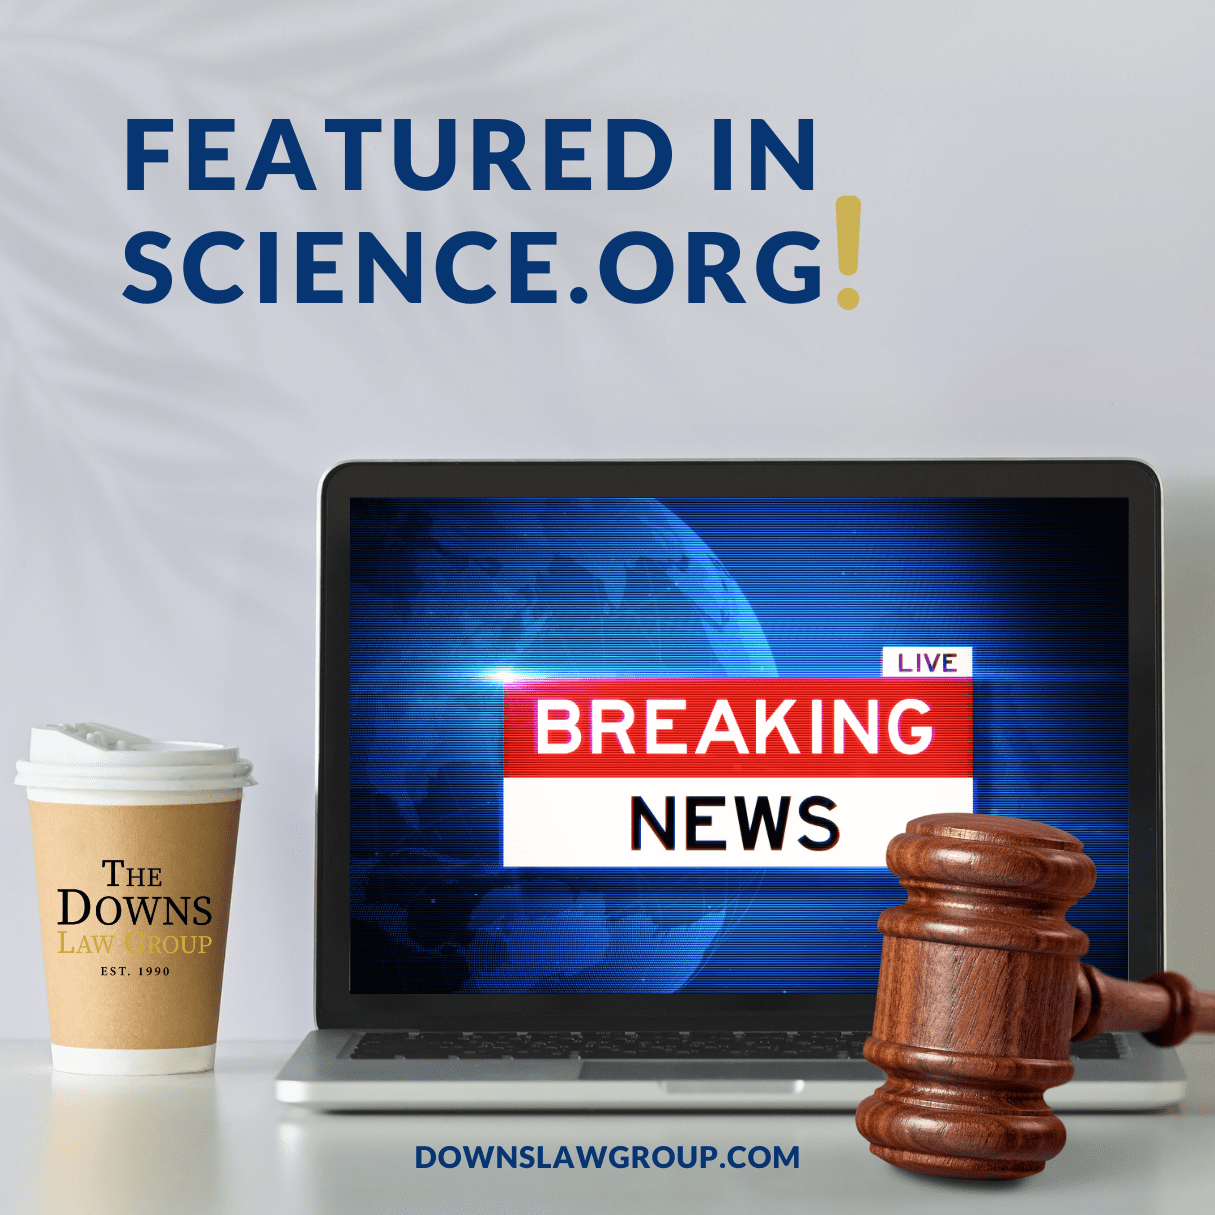 The Downs Law Group was recently featured on Science.org discussing BP Oil Spill Lawsuit case